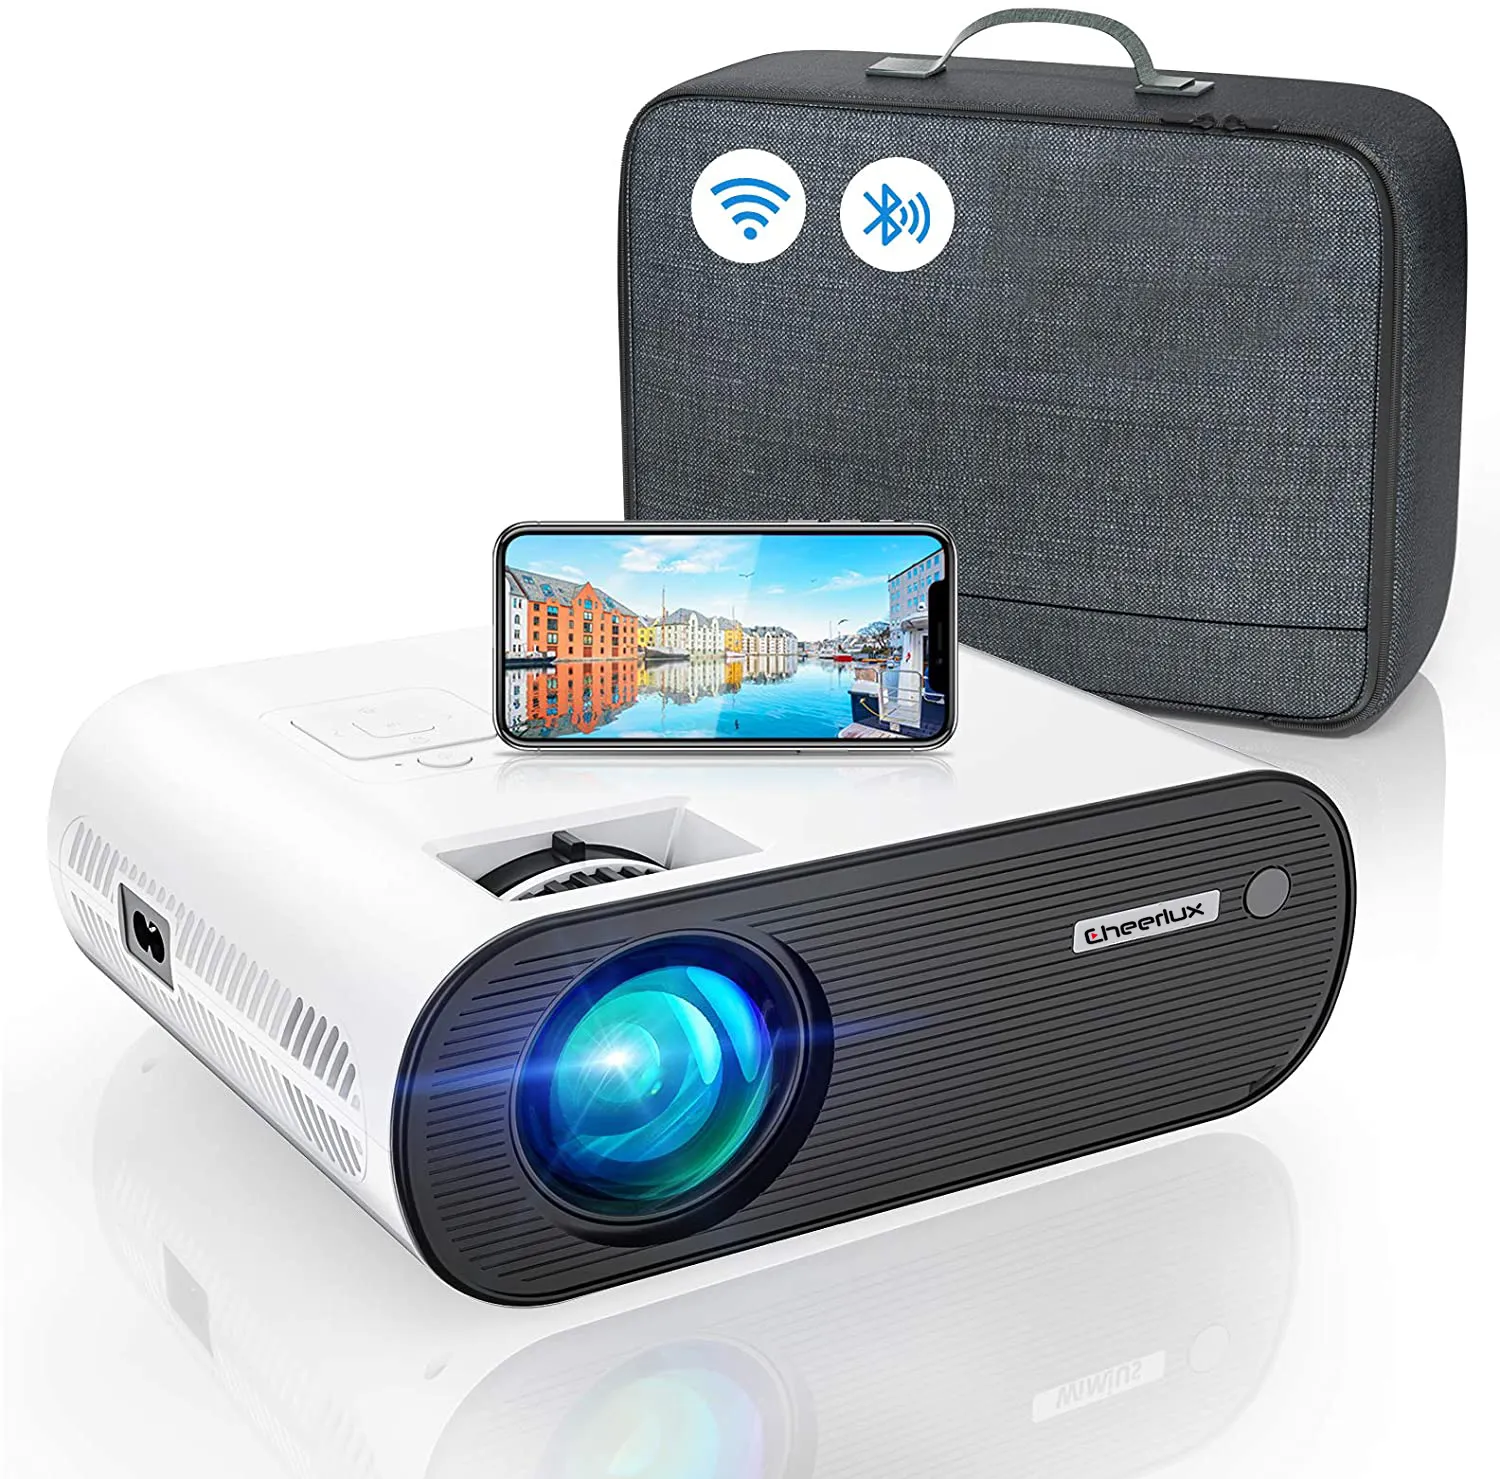 CHEERLUX WIFI Smart Projector BT wireless mini projector Multimedia Beamer Video Proyector 2600 Lumens for home theater game